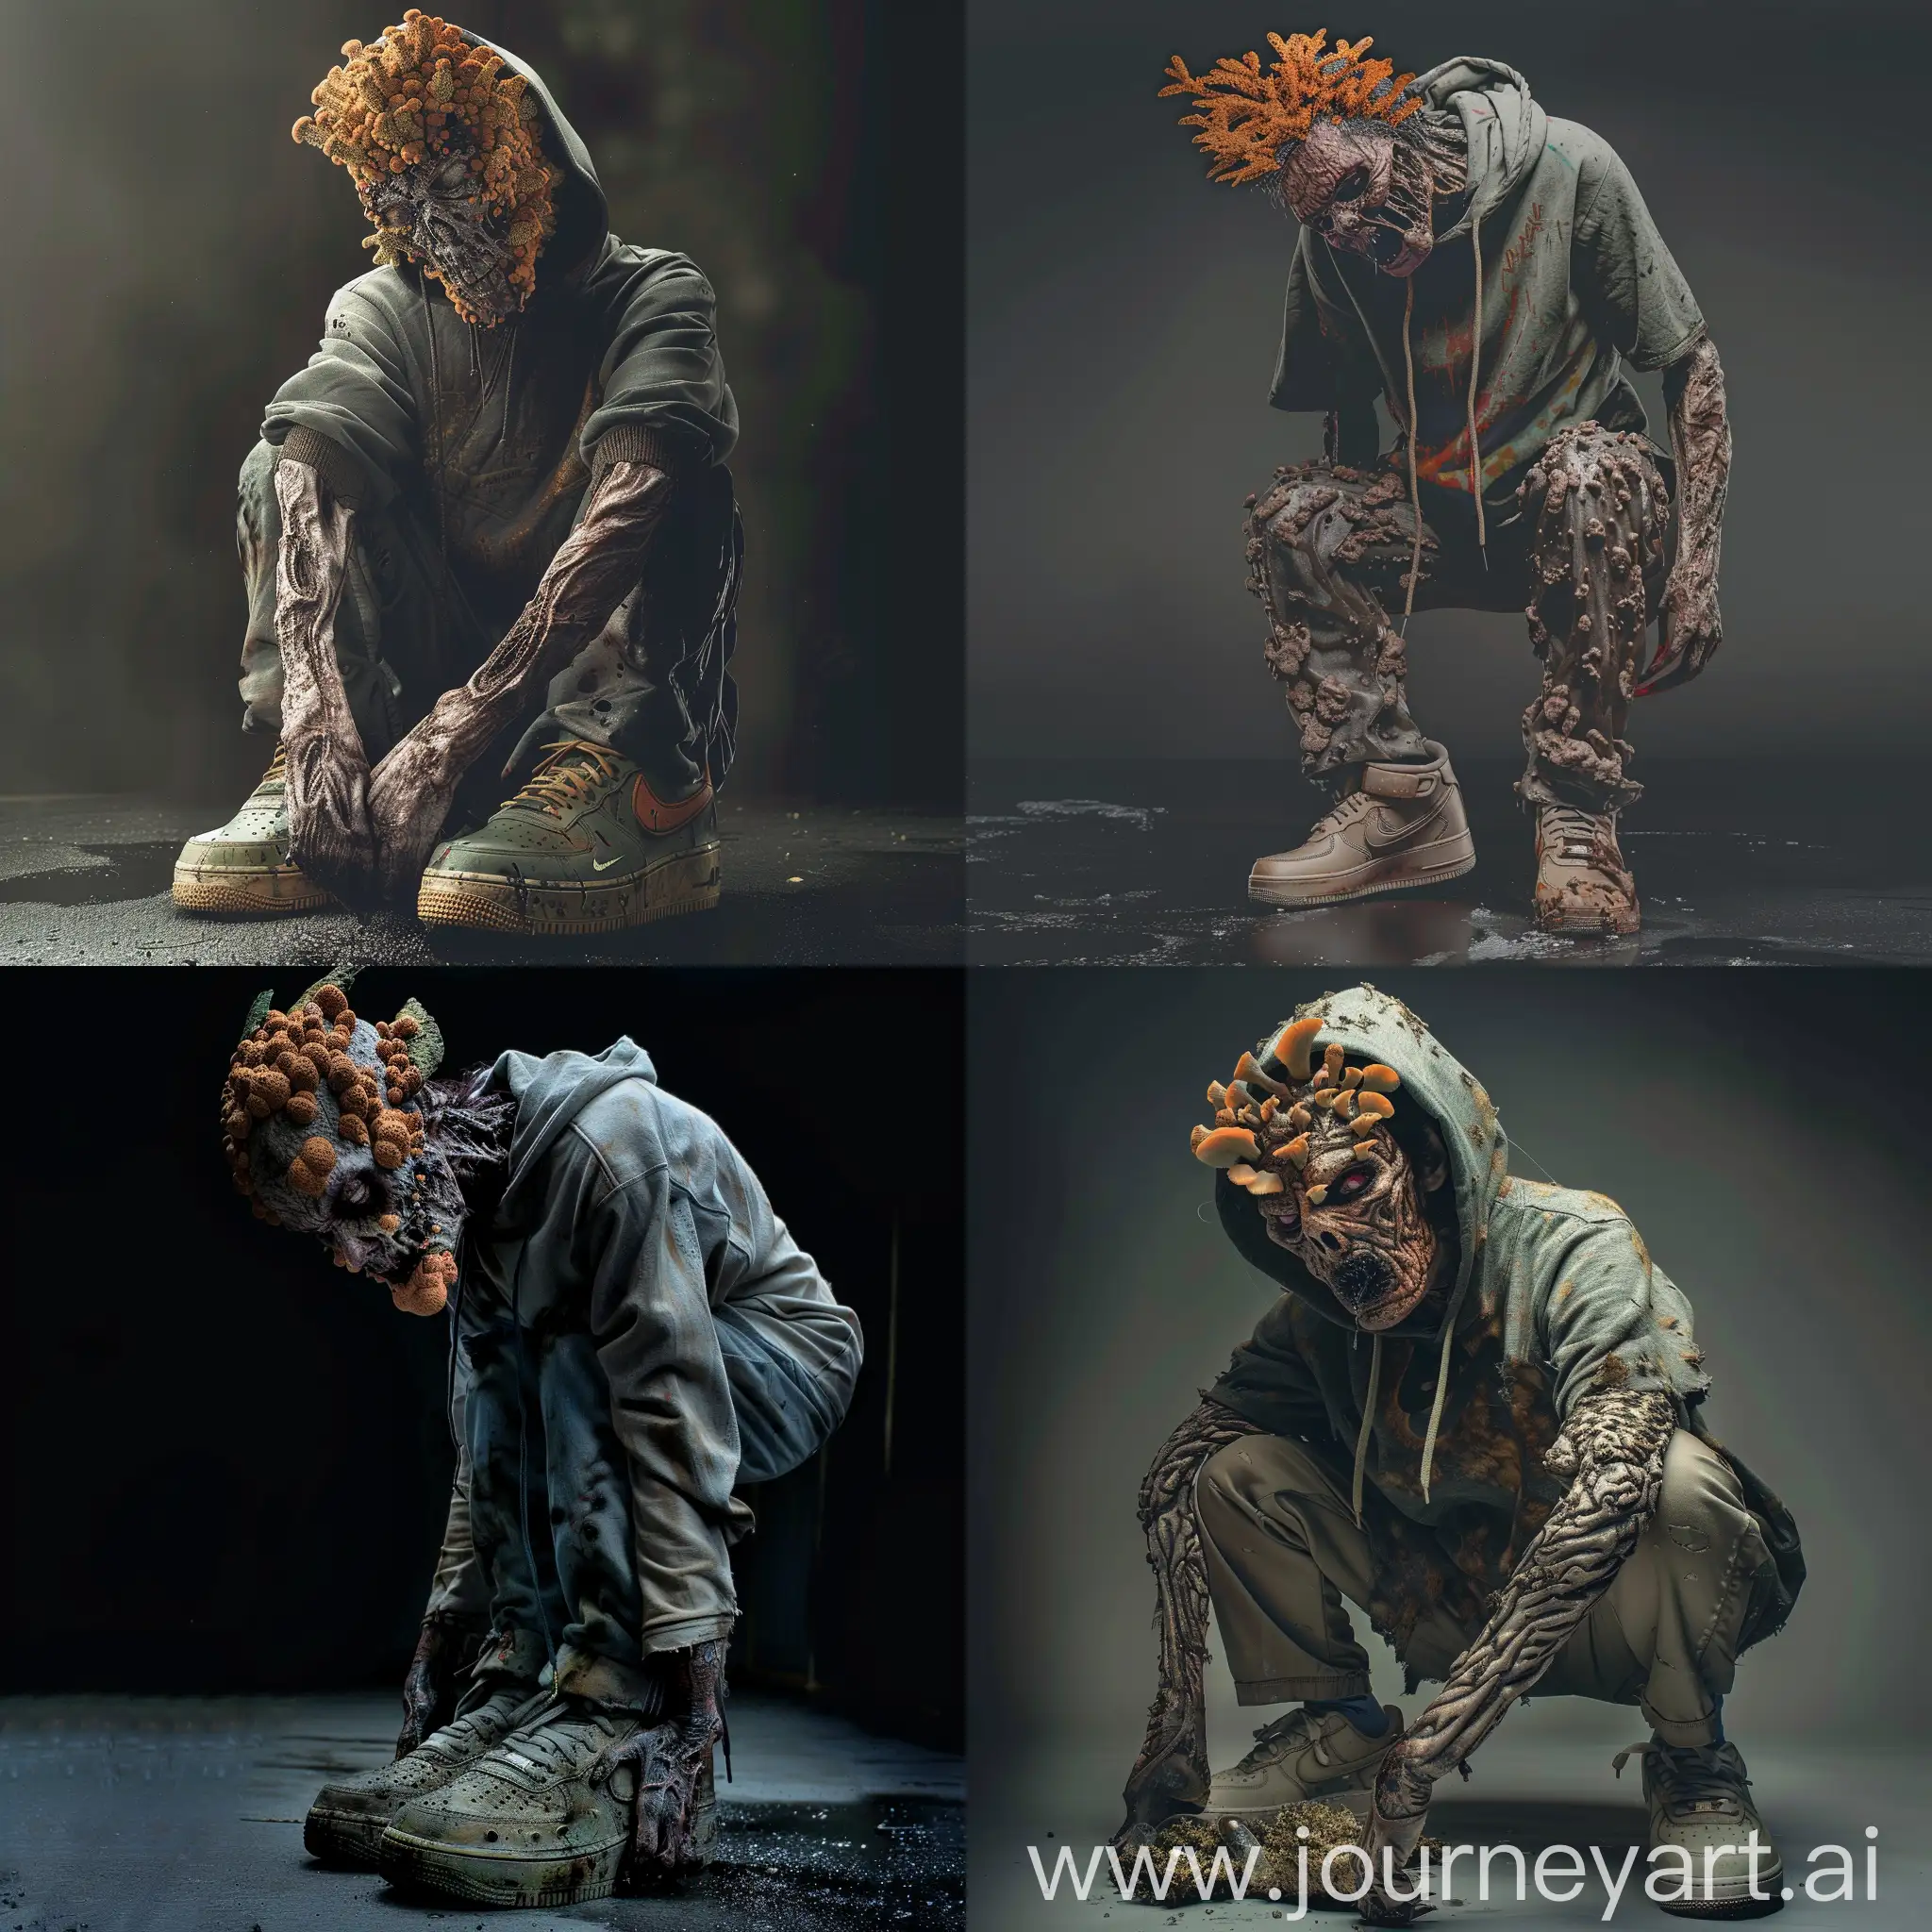  A photo of a zombie covered in fungus. He should look like a weird zombie, he wearing hoddie and Nike Air force shoes --cref https://cdn.discordapp.com/attachments/1200713789763485788/1221389215670206534/images_31.jpg?ex=66126659&is=65fff159&hm=26a112d78278f2a7c750c168be45e0debf73696e6c5c9220a07c4f06cc01c441& --cw 100 --v 6 